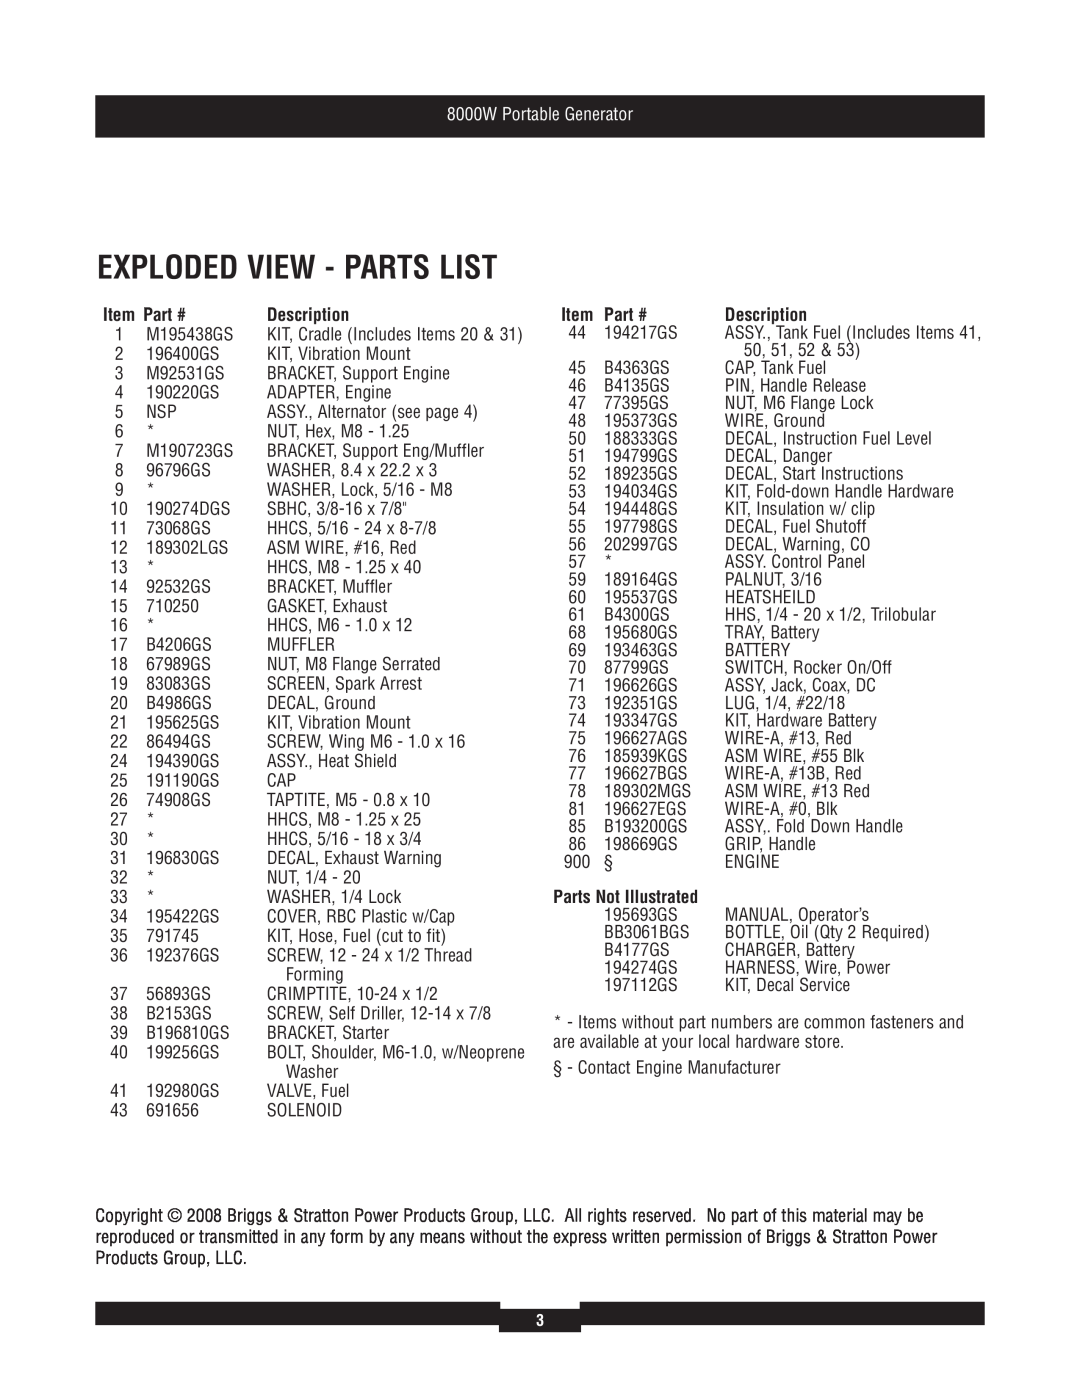 Briggs & Stratton 030385 manual Exploded View - Parts List, Parts Not Illustrated, 8000W Portable Generator 